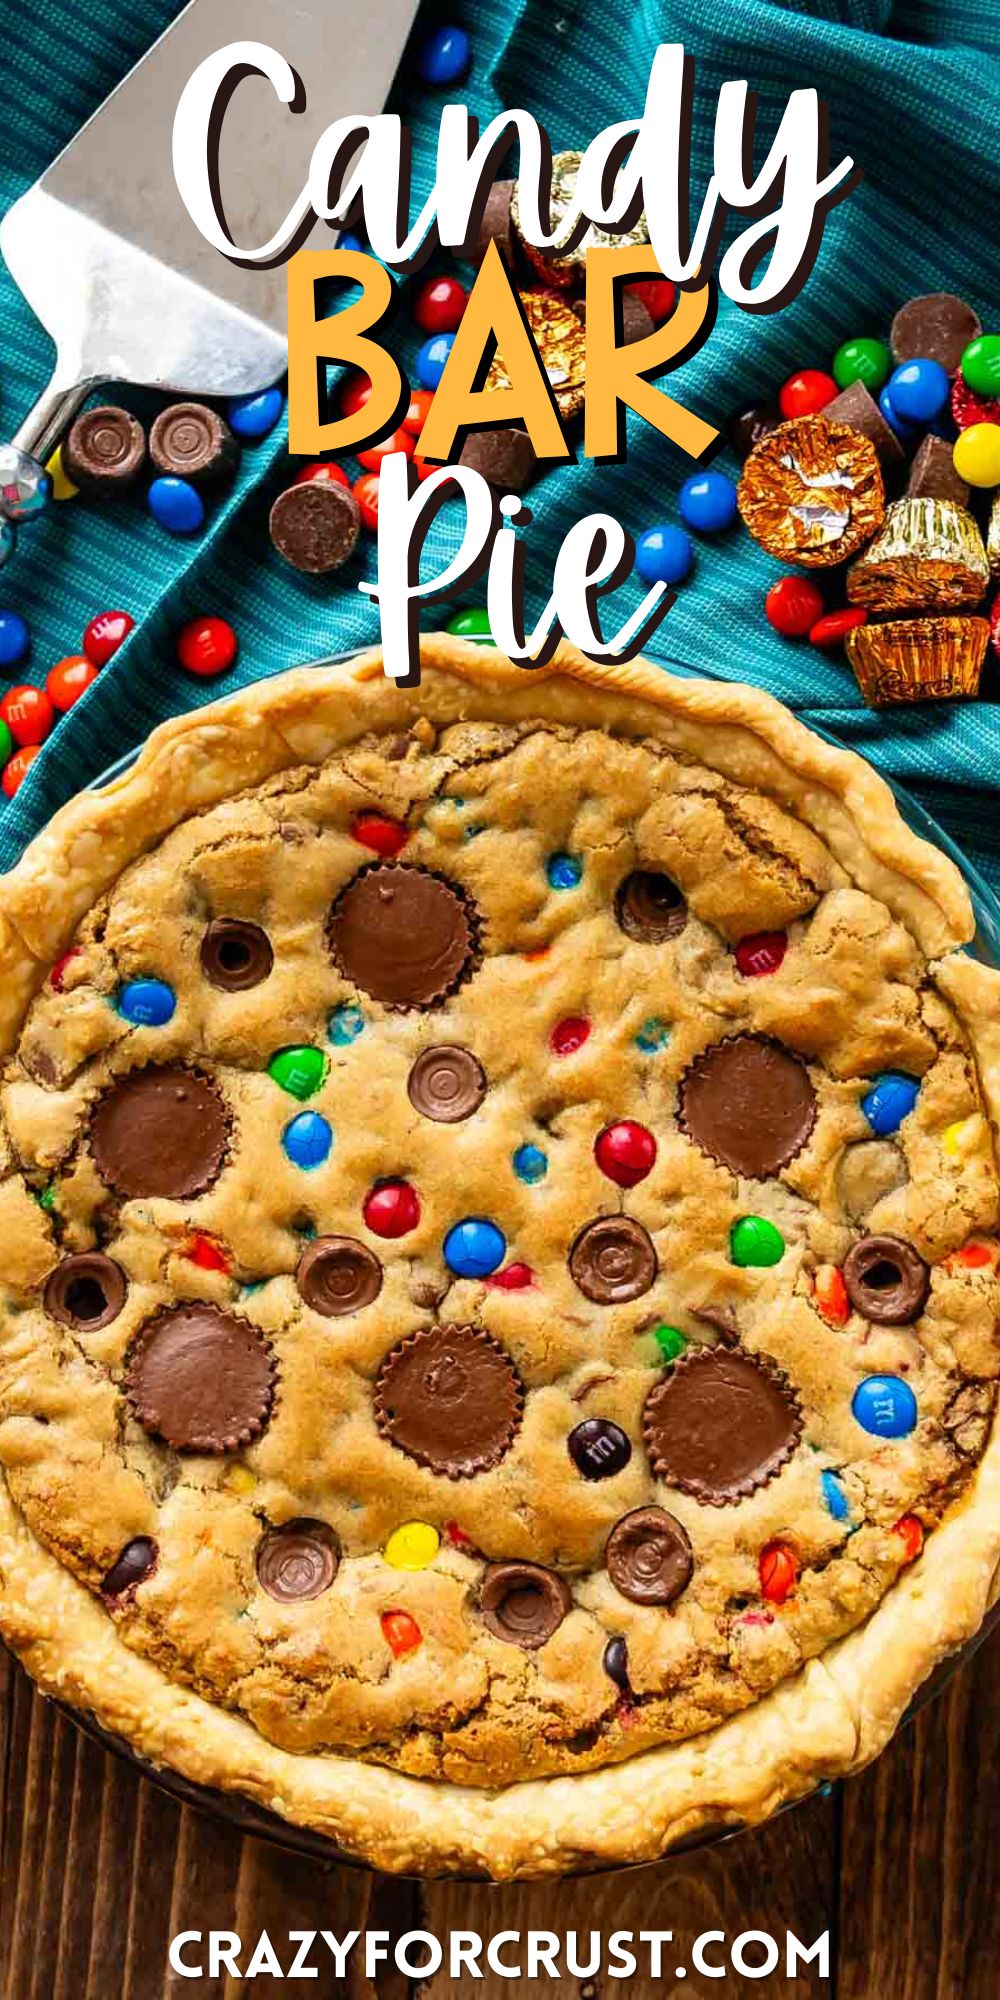 full tan pie with candy baked in and candy around the pie with words on the image.